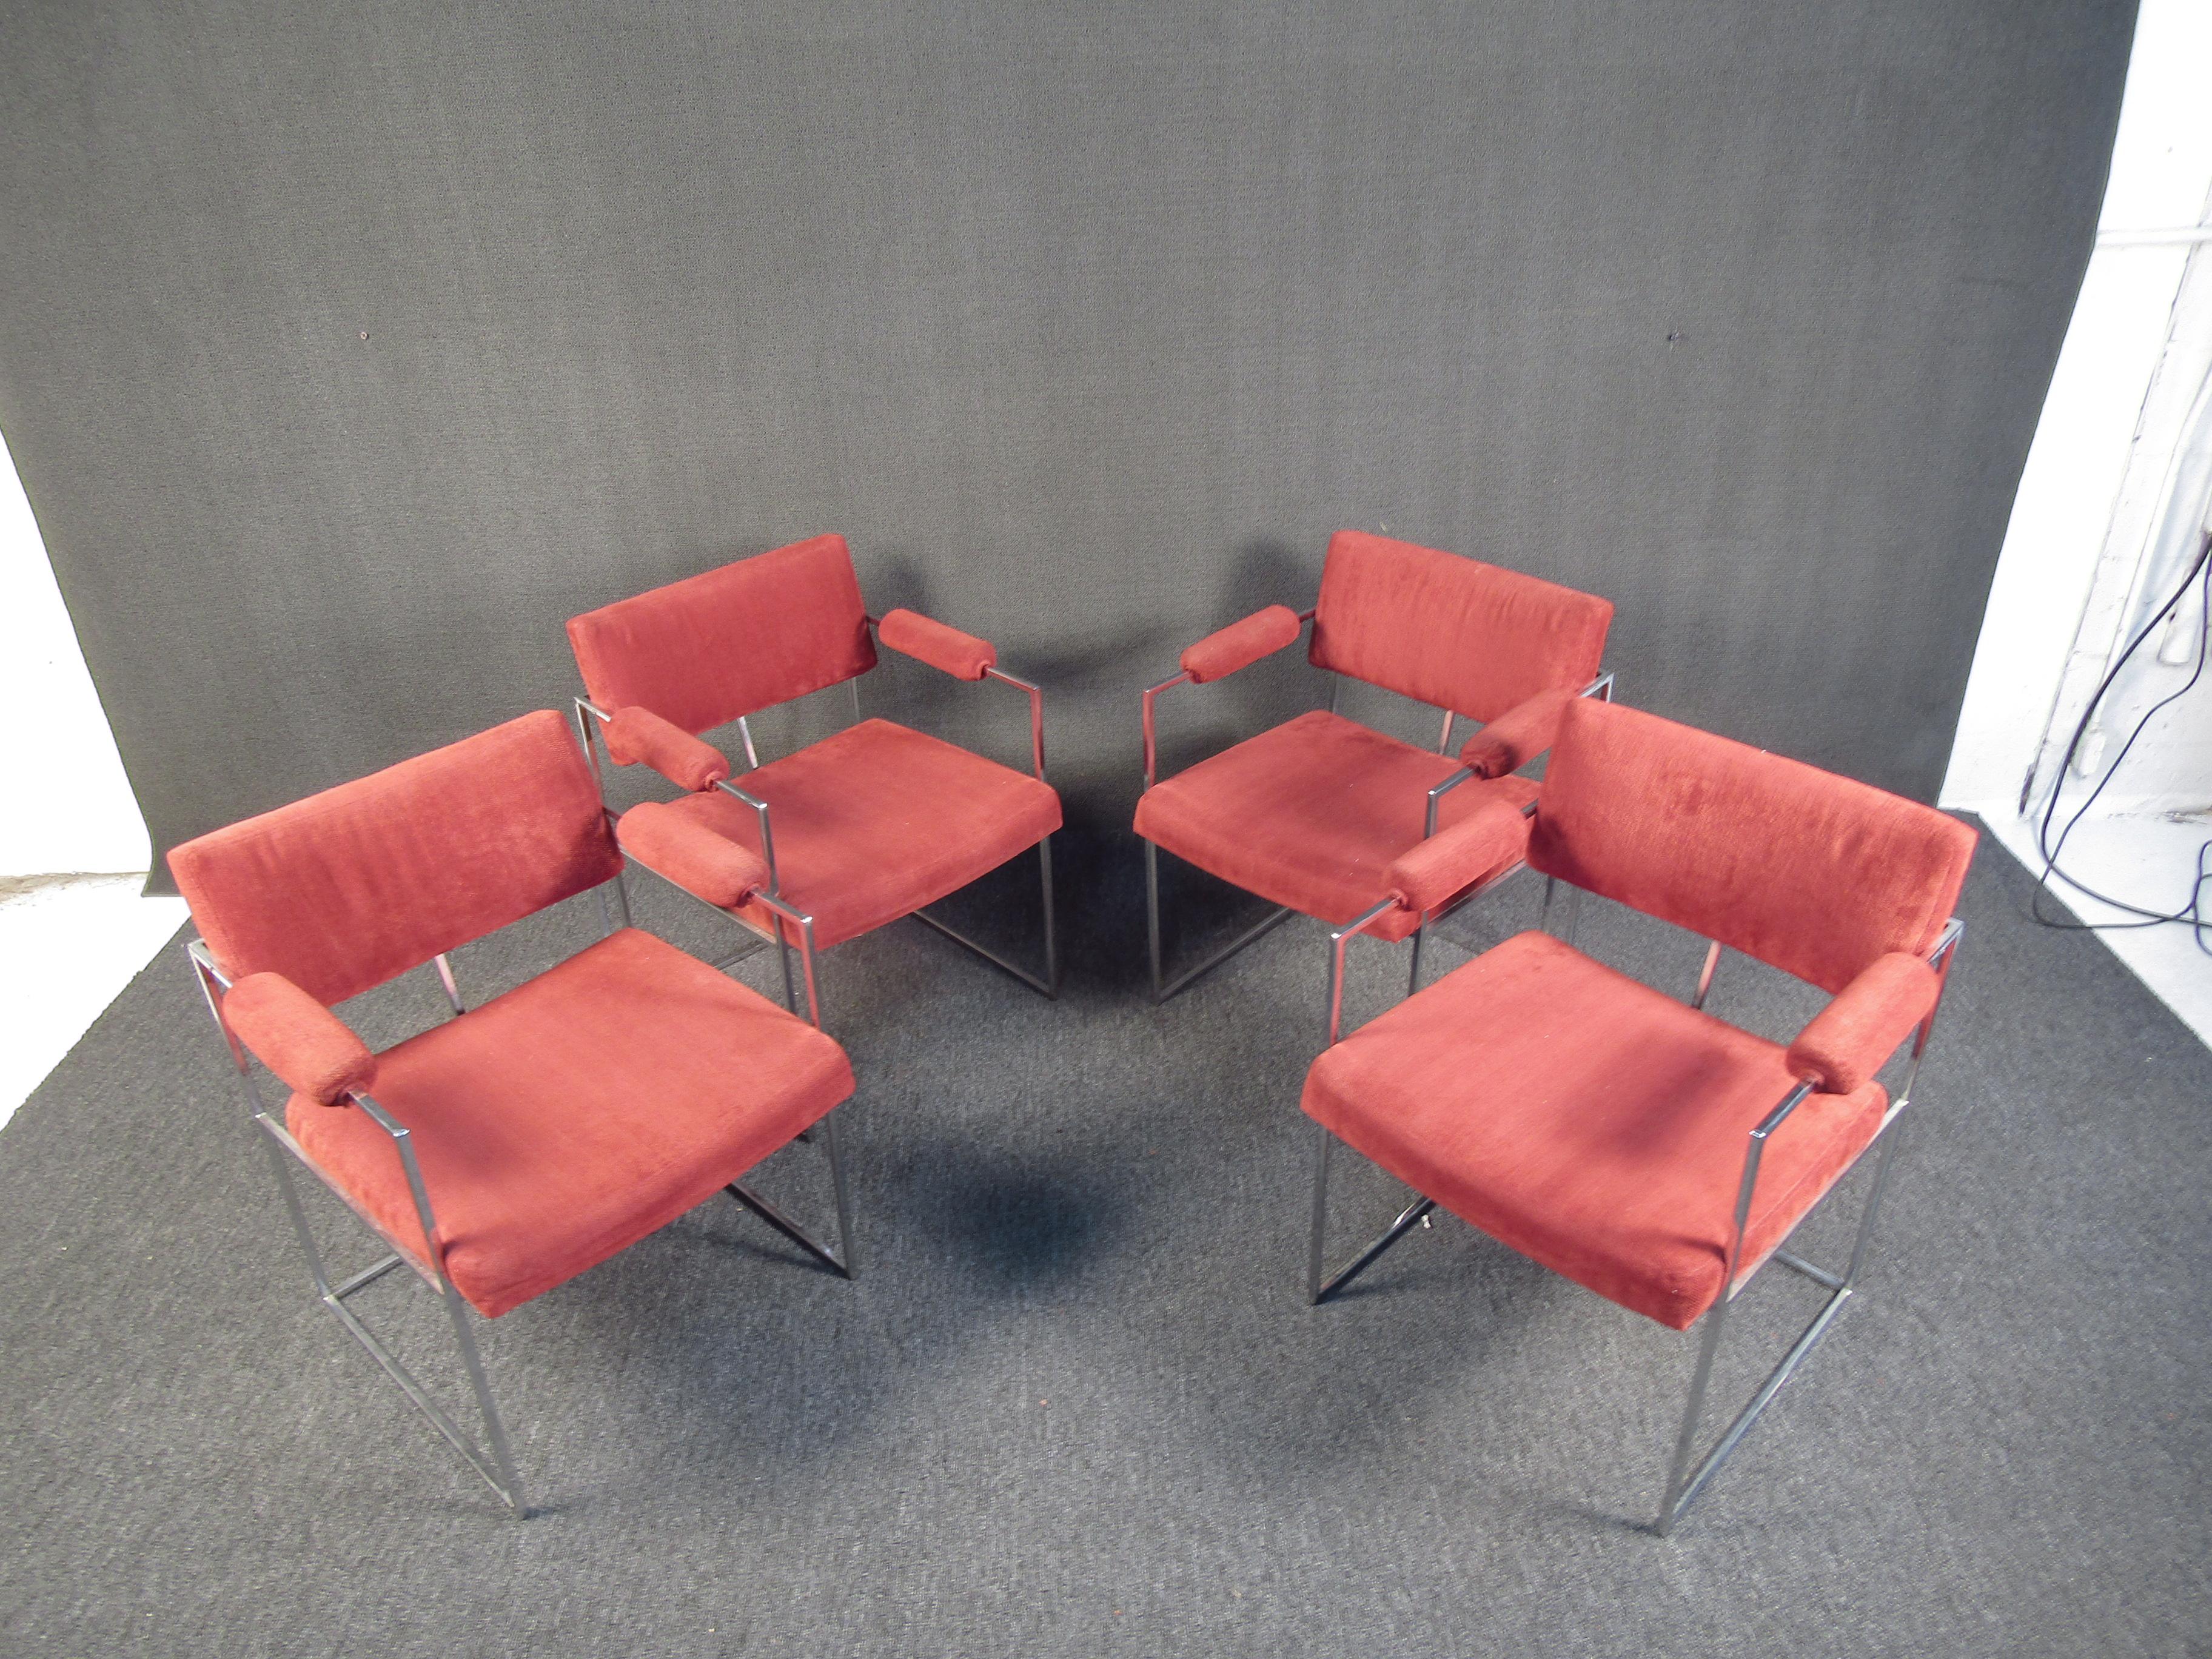 This stunning set of chairs by Marlo Baughman feature clean chrome bases, and plush upholstery seats. With style and functionality, these chairs will bring together any space without overpowering the rest of the room. Please confirm the item